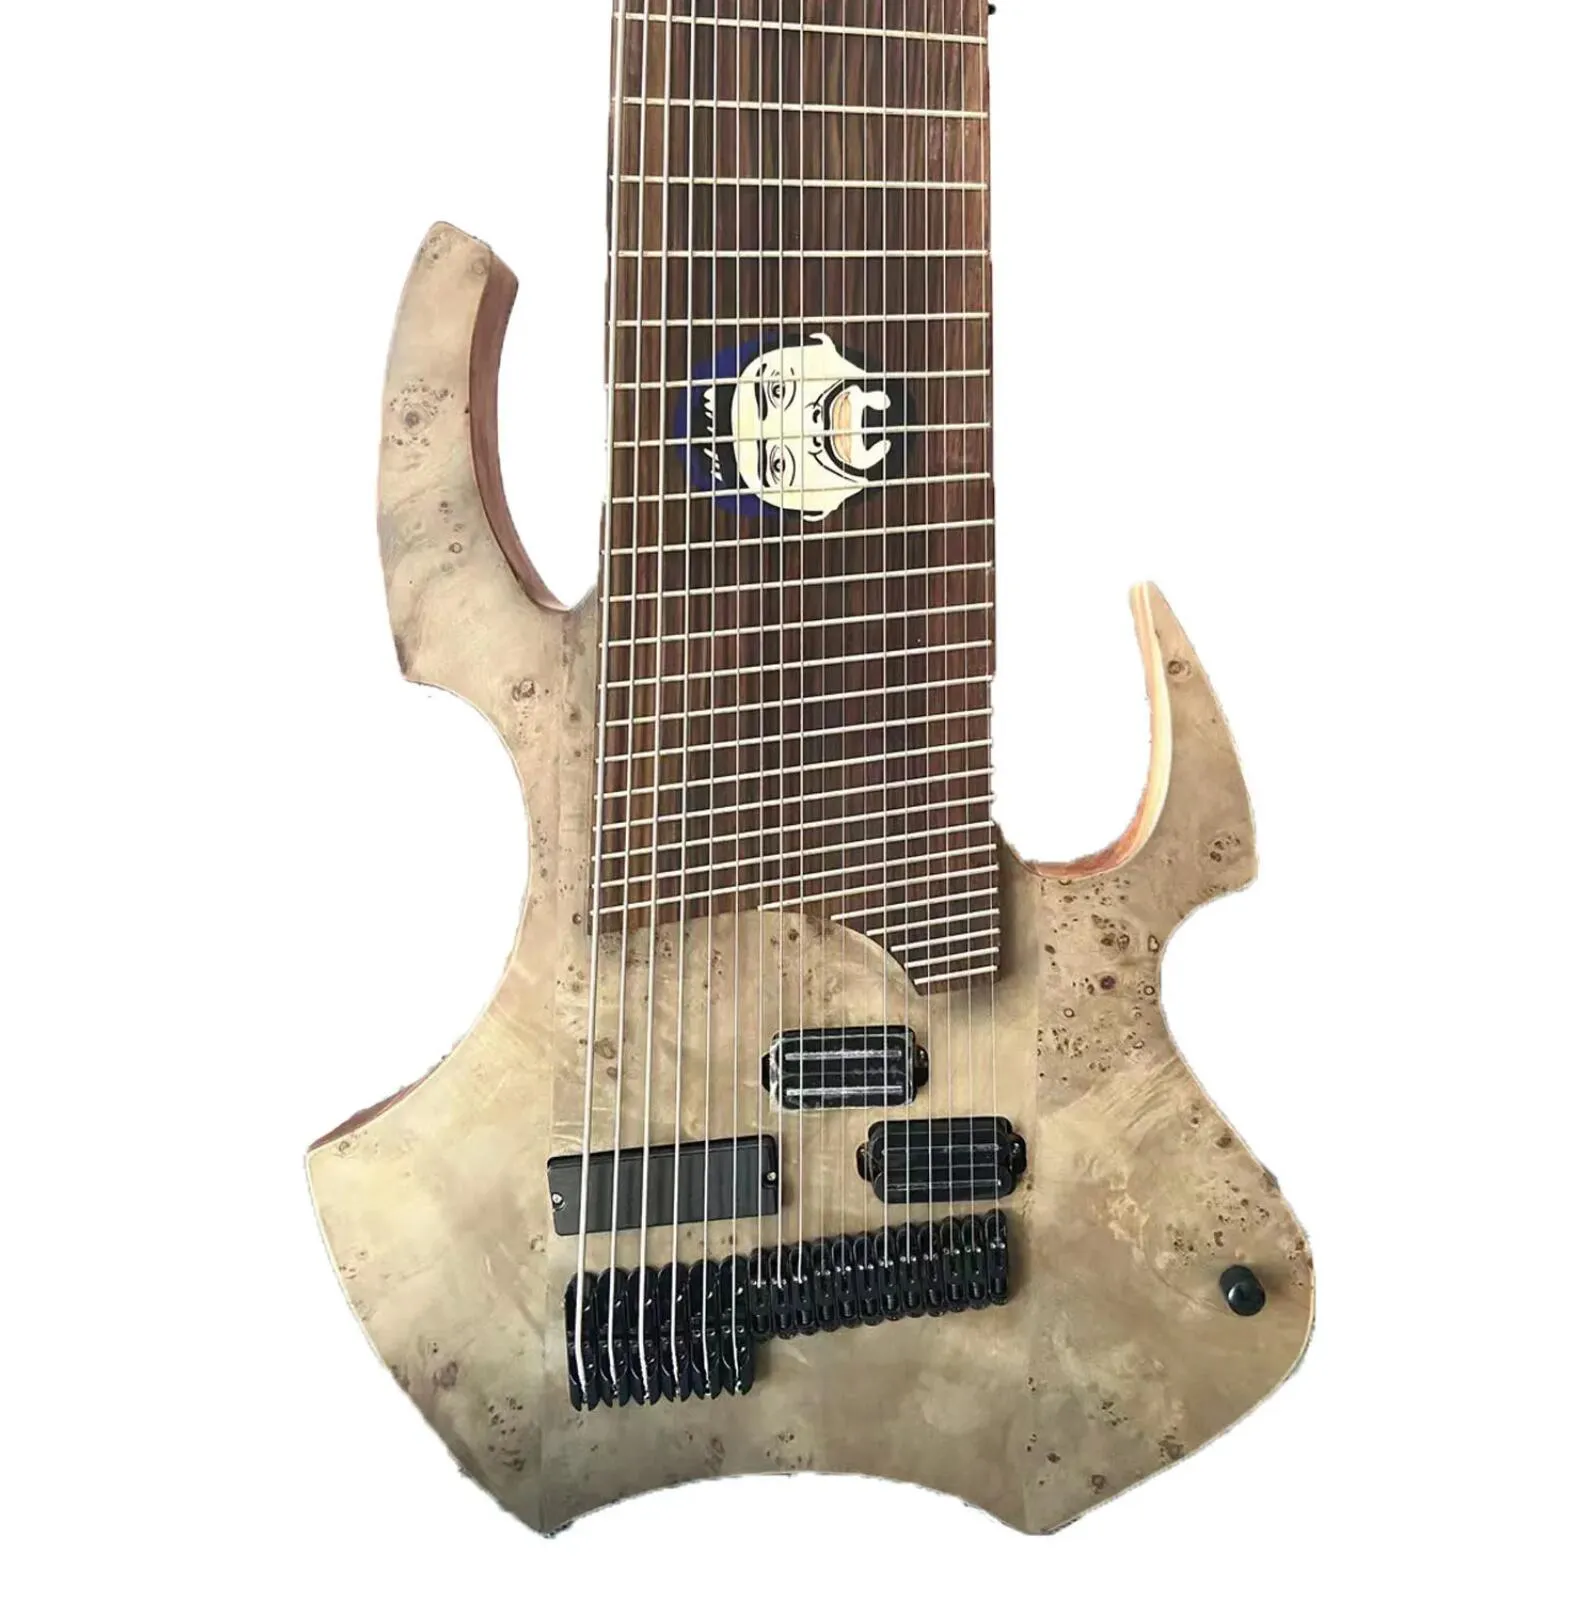 Orms Djent Jared Dines 18 Strings monstrosity Spalted Maple Top Satin Grey Electric Bass Guitar Mahogany xyloPhone Body Rosewood Fingerboard 6 +12 Black hardware